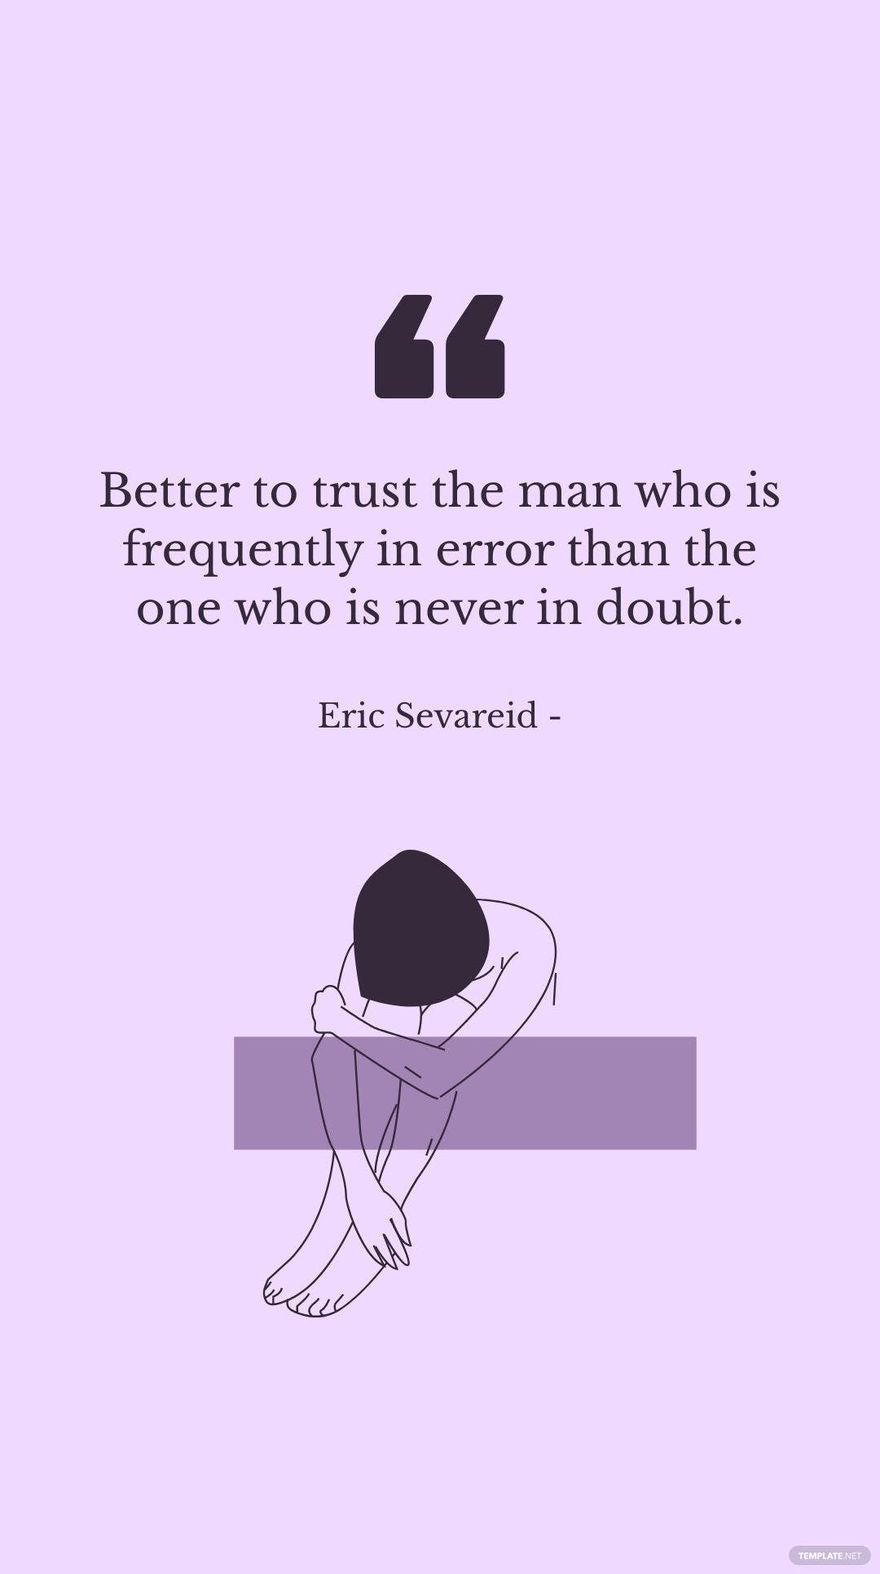 Free Eric Sevareid - Better to trust the man who is frequently in error than the one who is never in doubt. in JPG